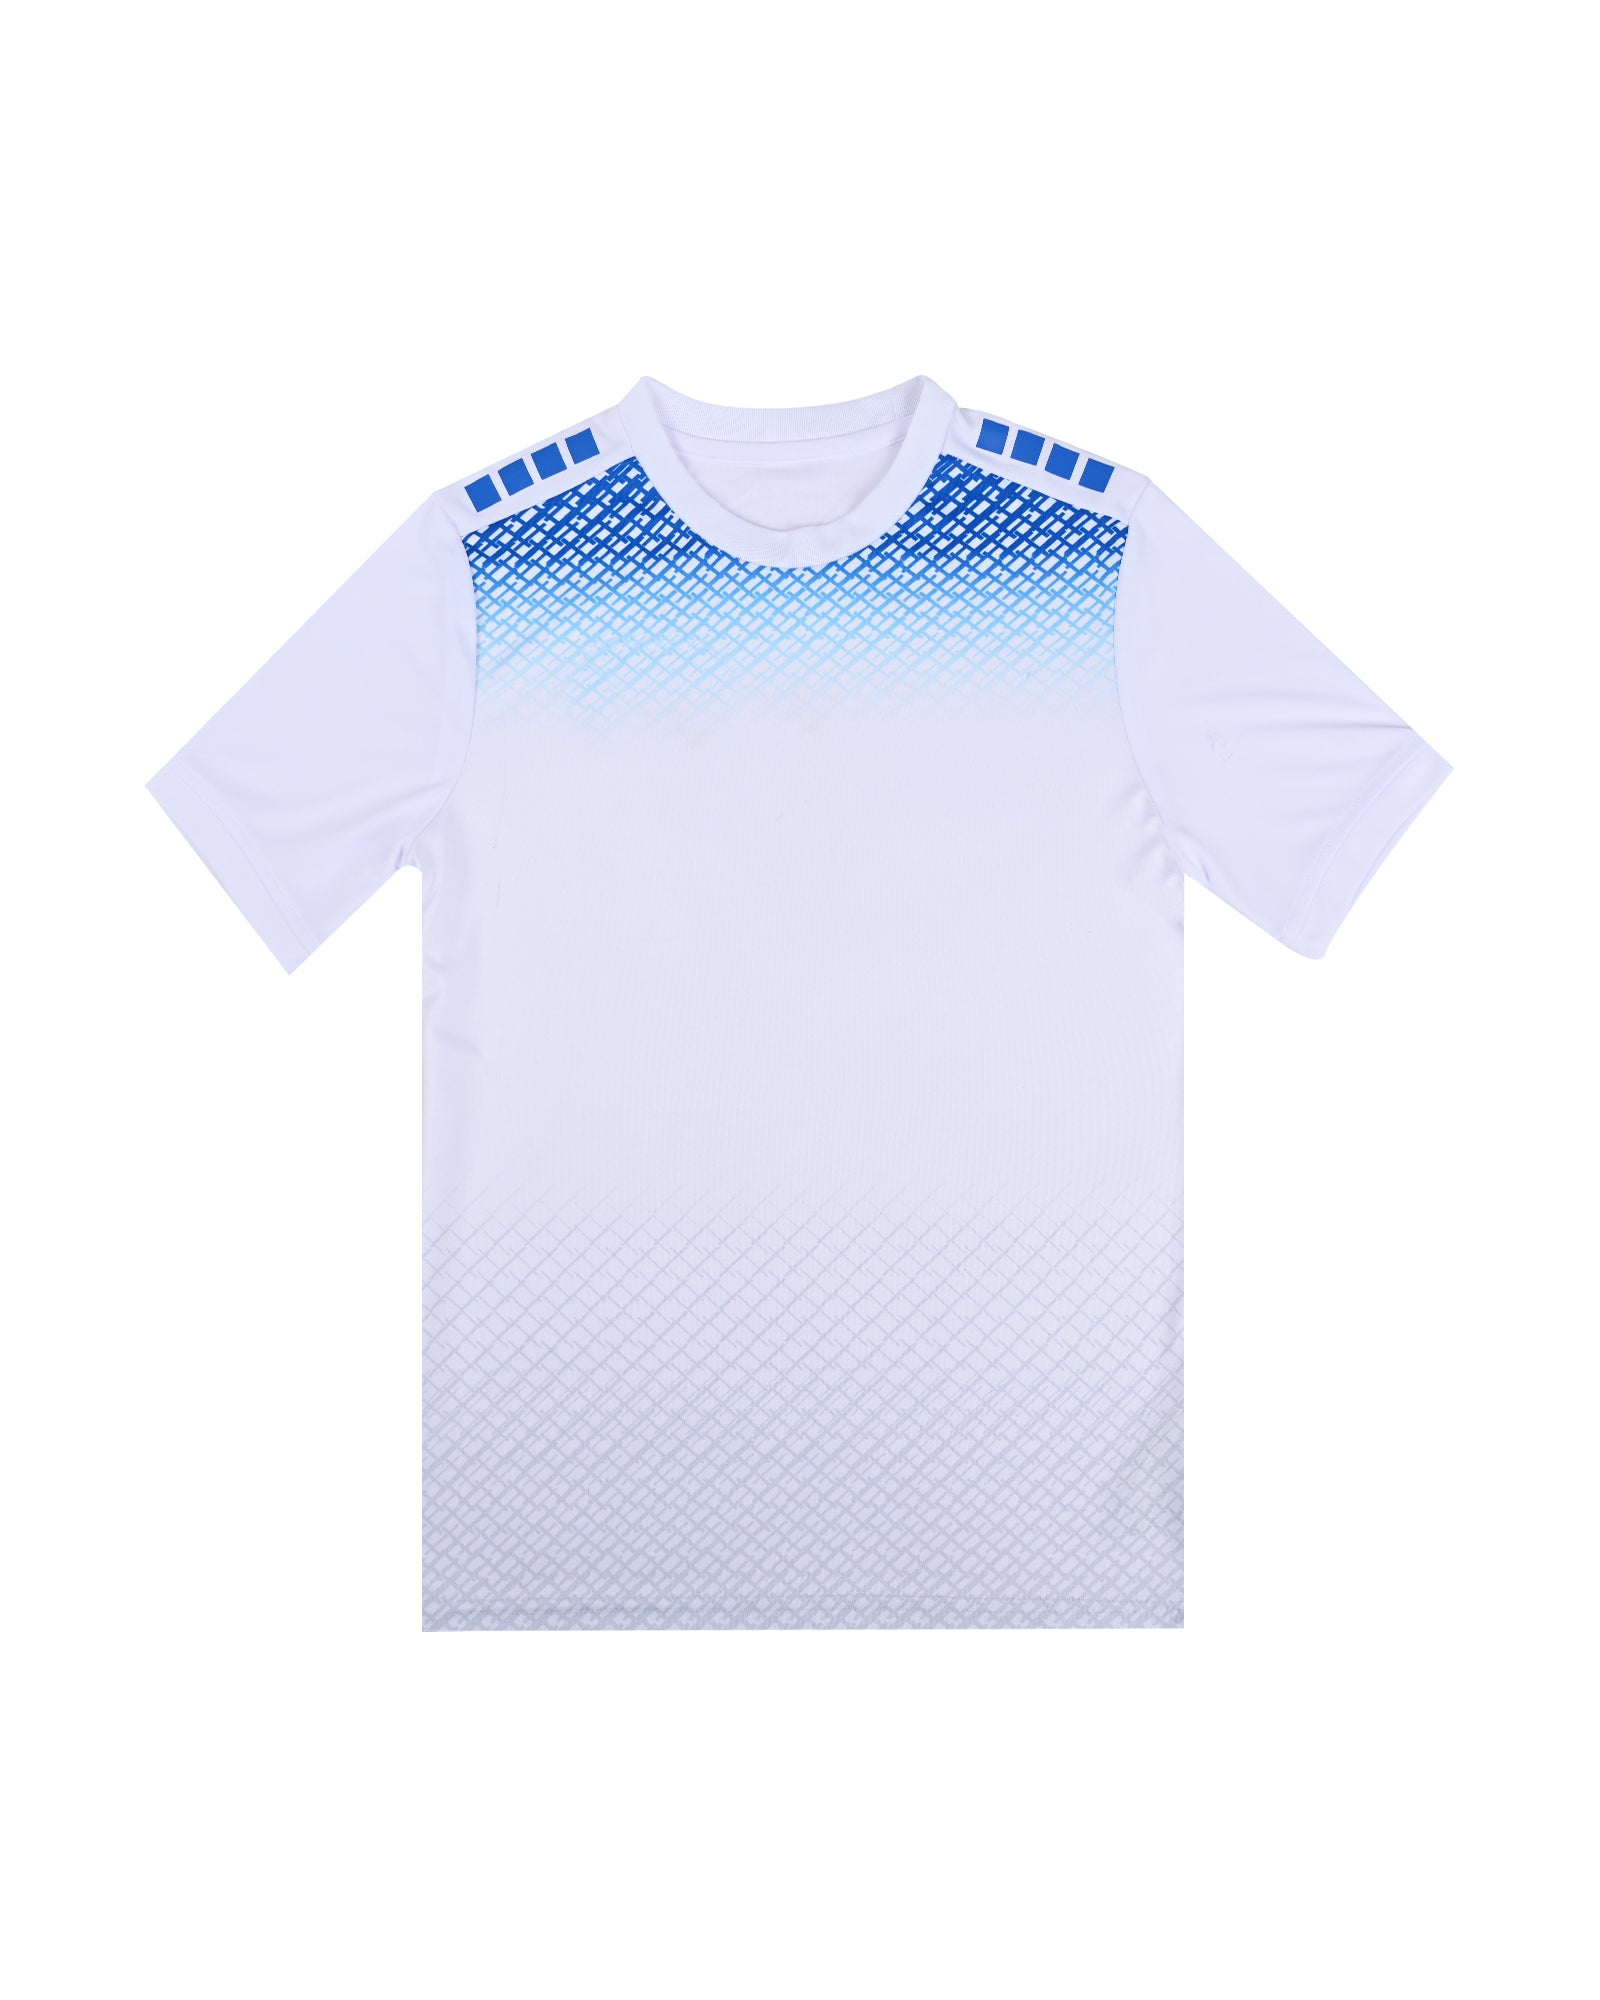 Boys Sports Printed Half Sleeve T-Shirt: Athletic Style for Active Boy